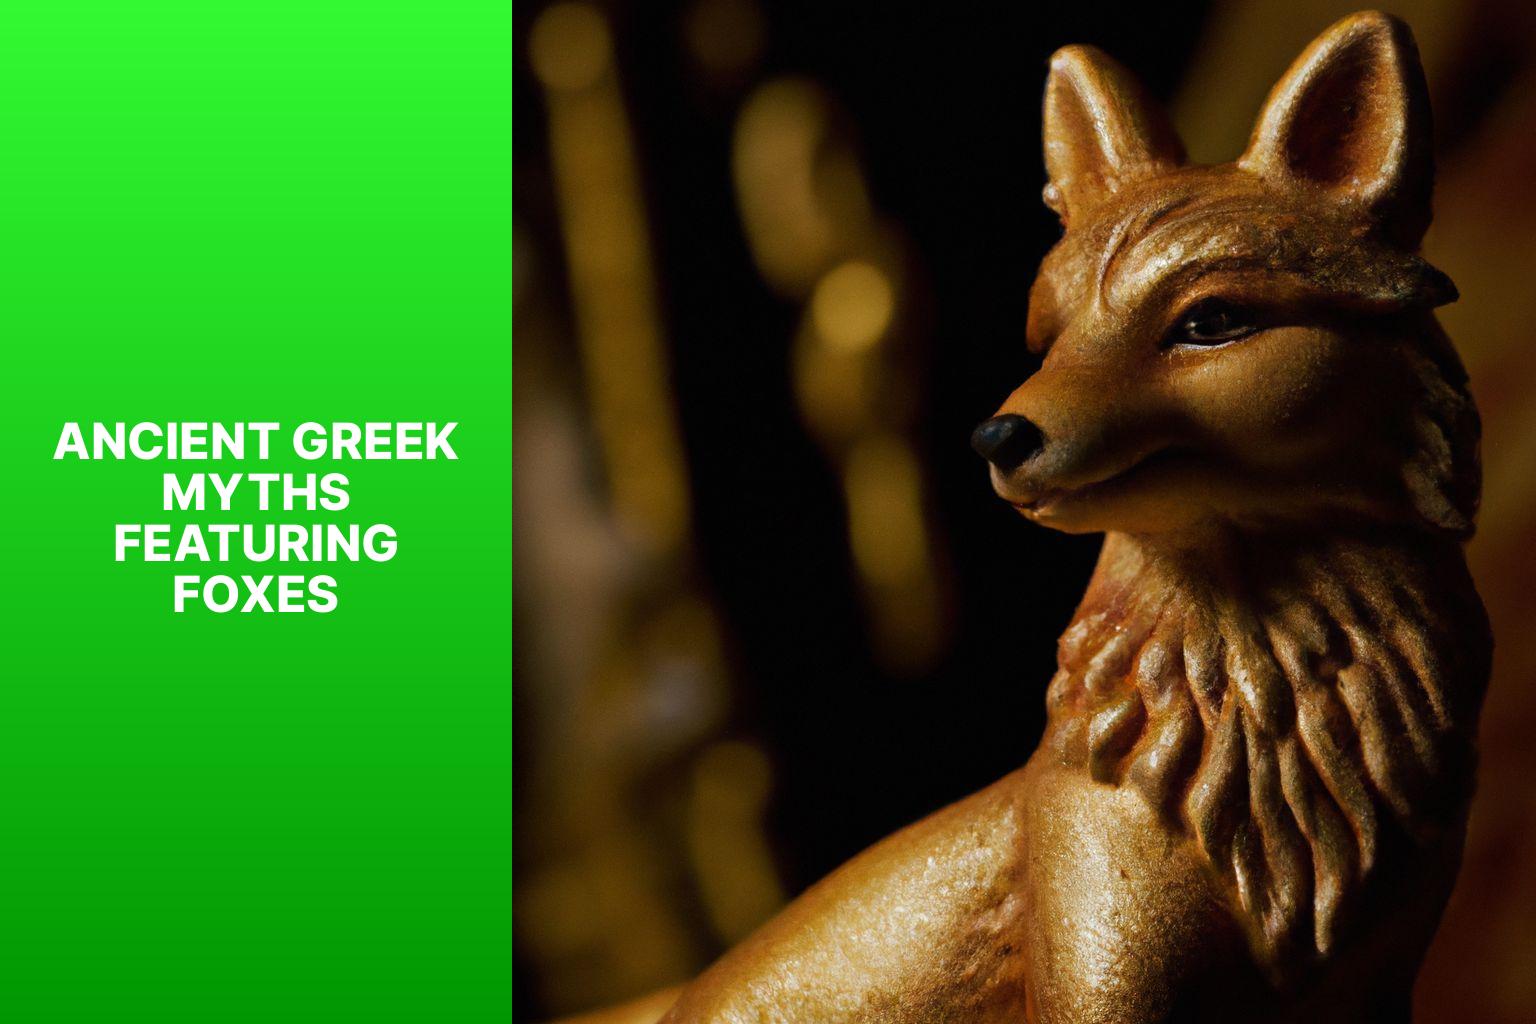 Ancient Greek Myths Featuring Foxes - Fox Myths in Ancient Greece 